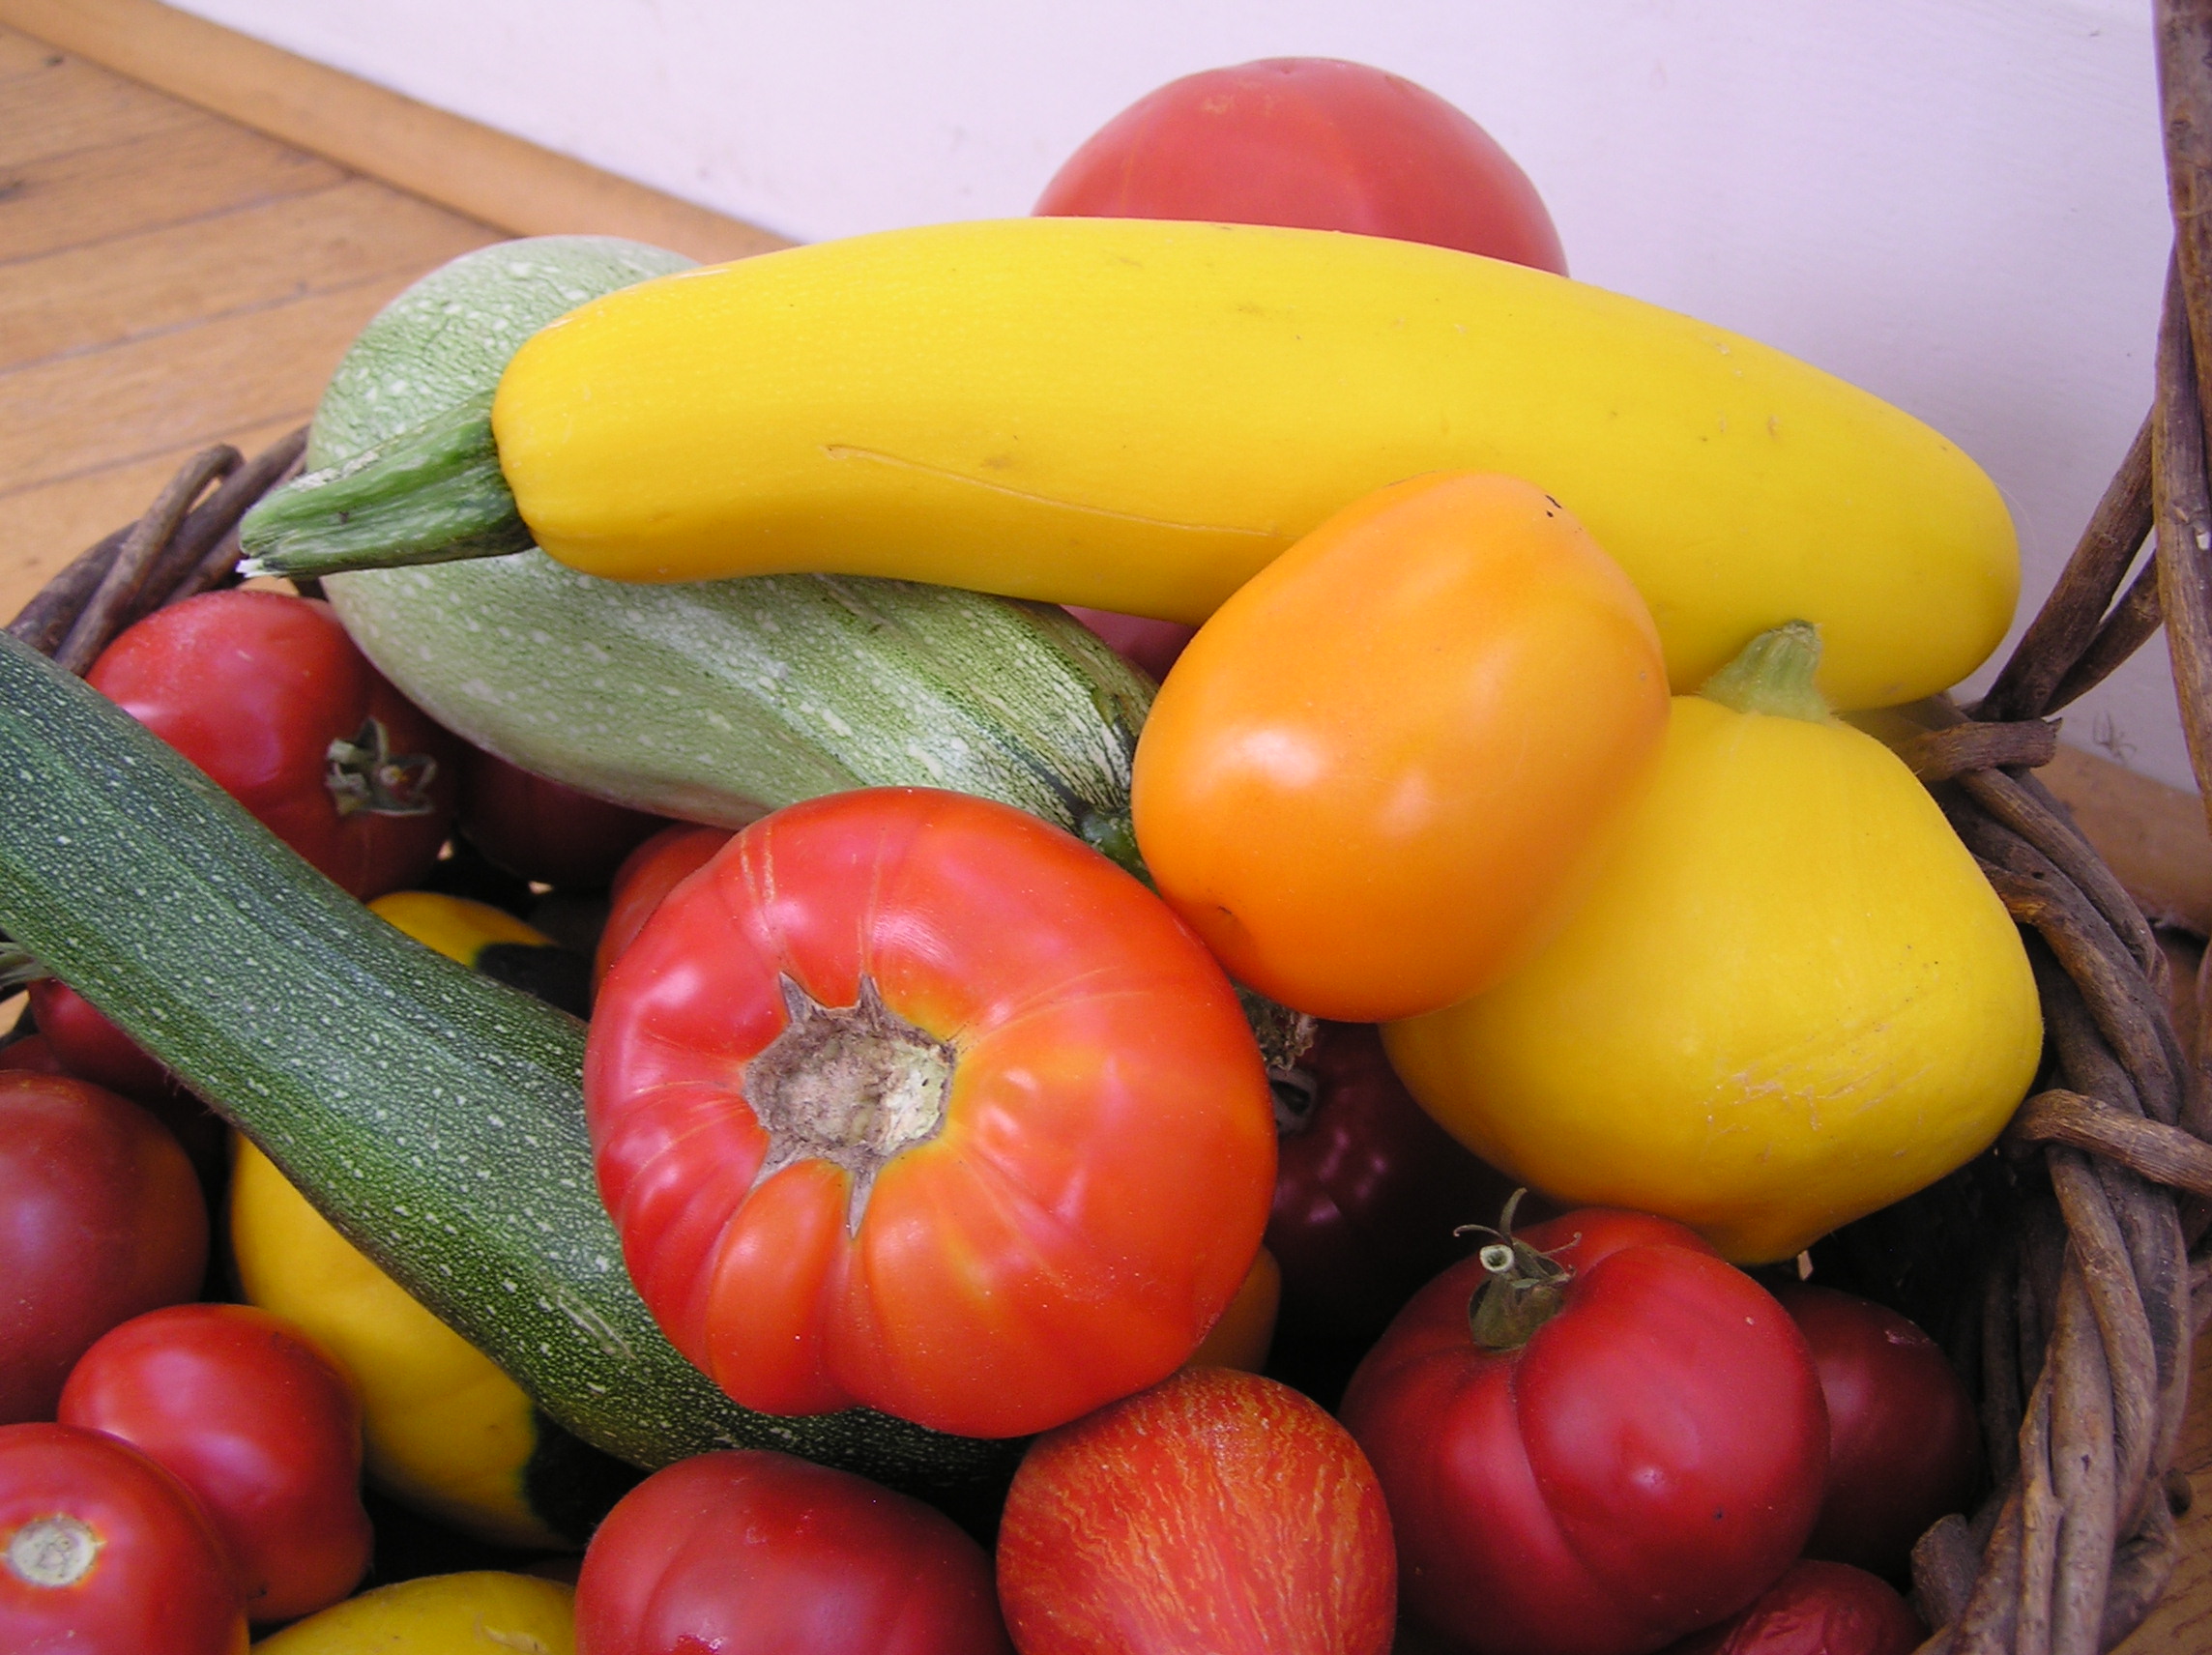 Tomatoes and summer squash - Are they safe? 